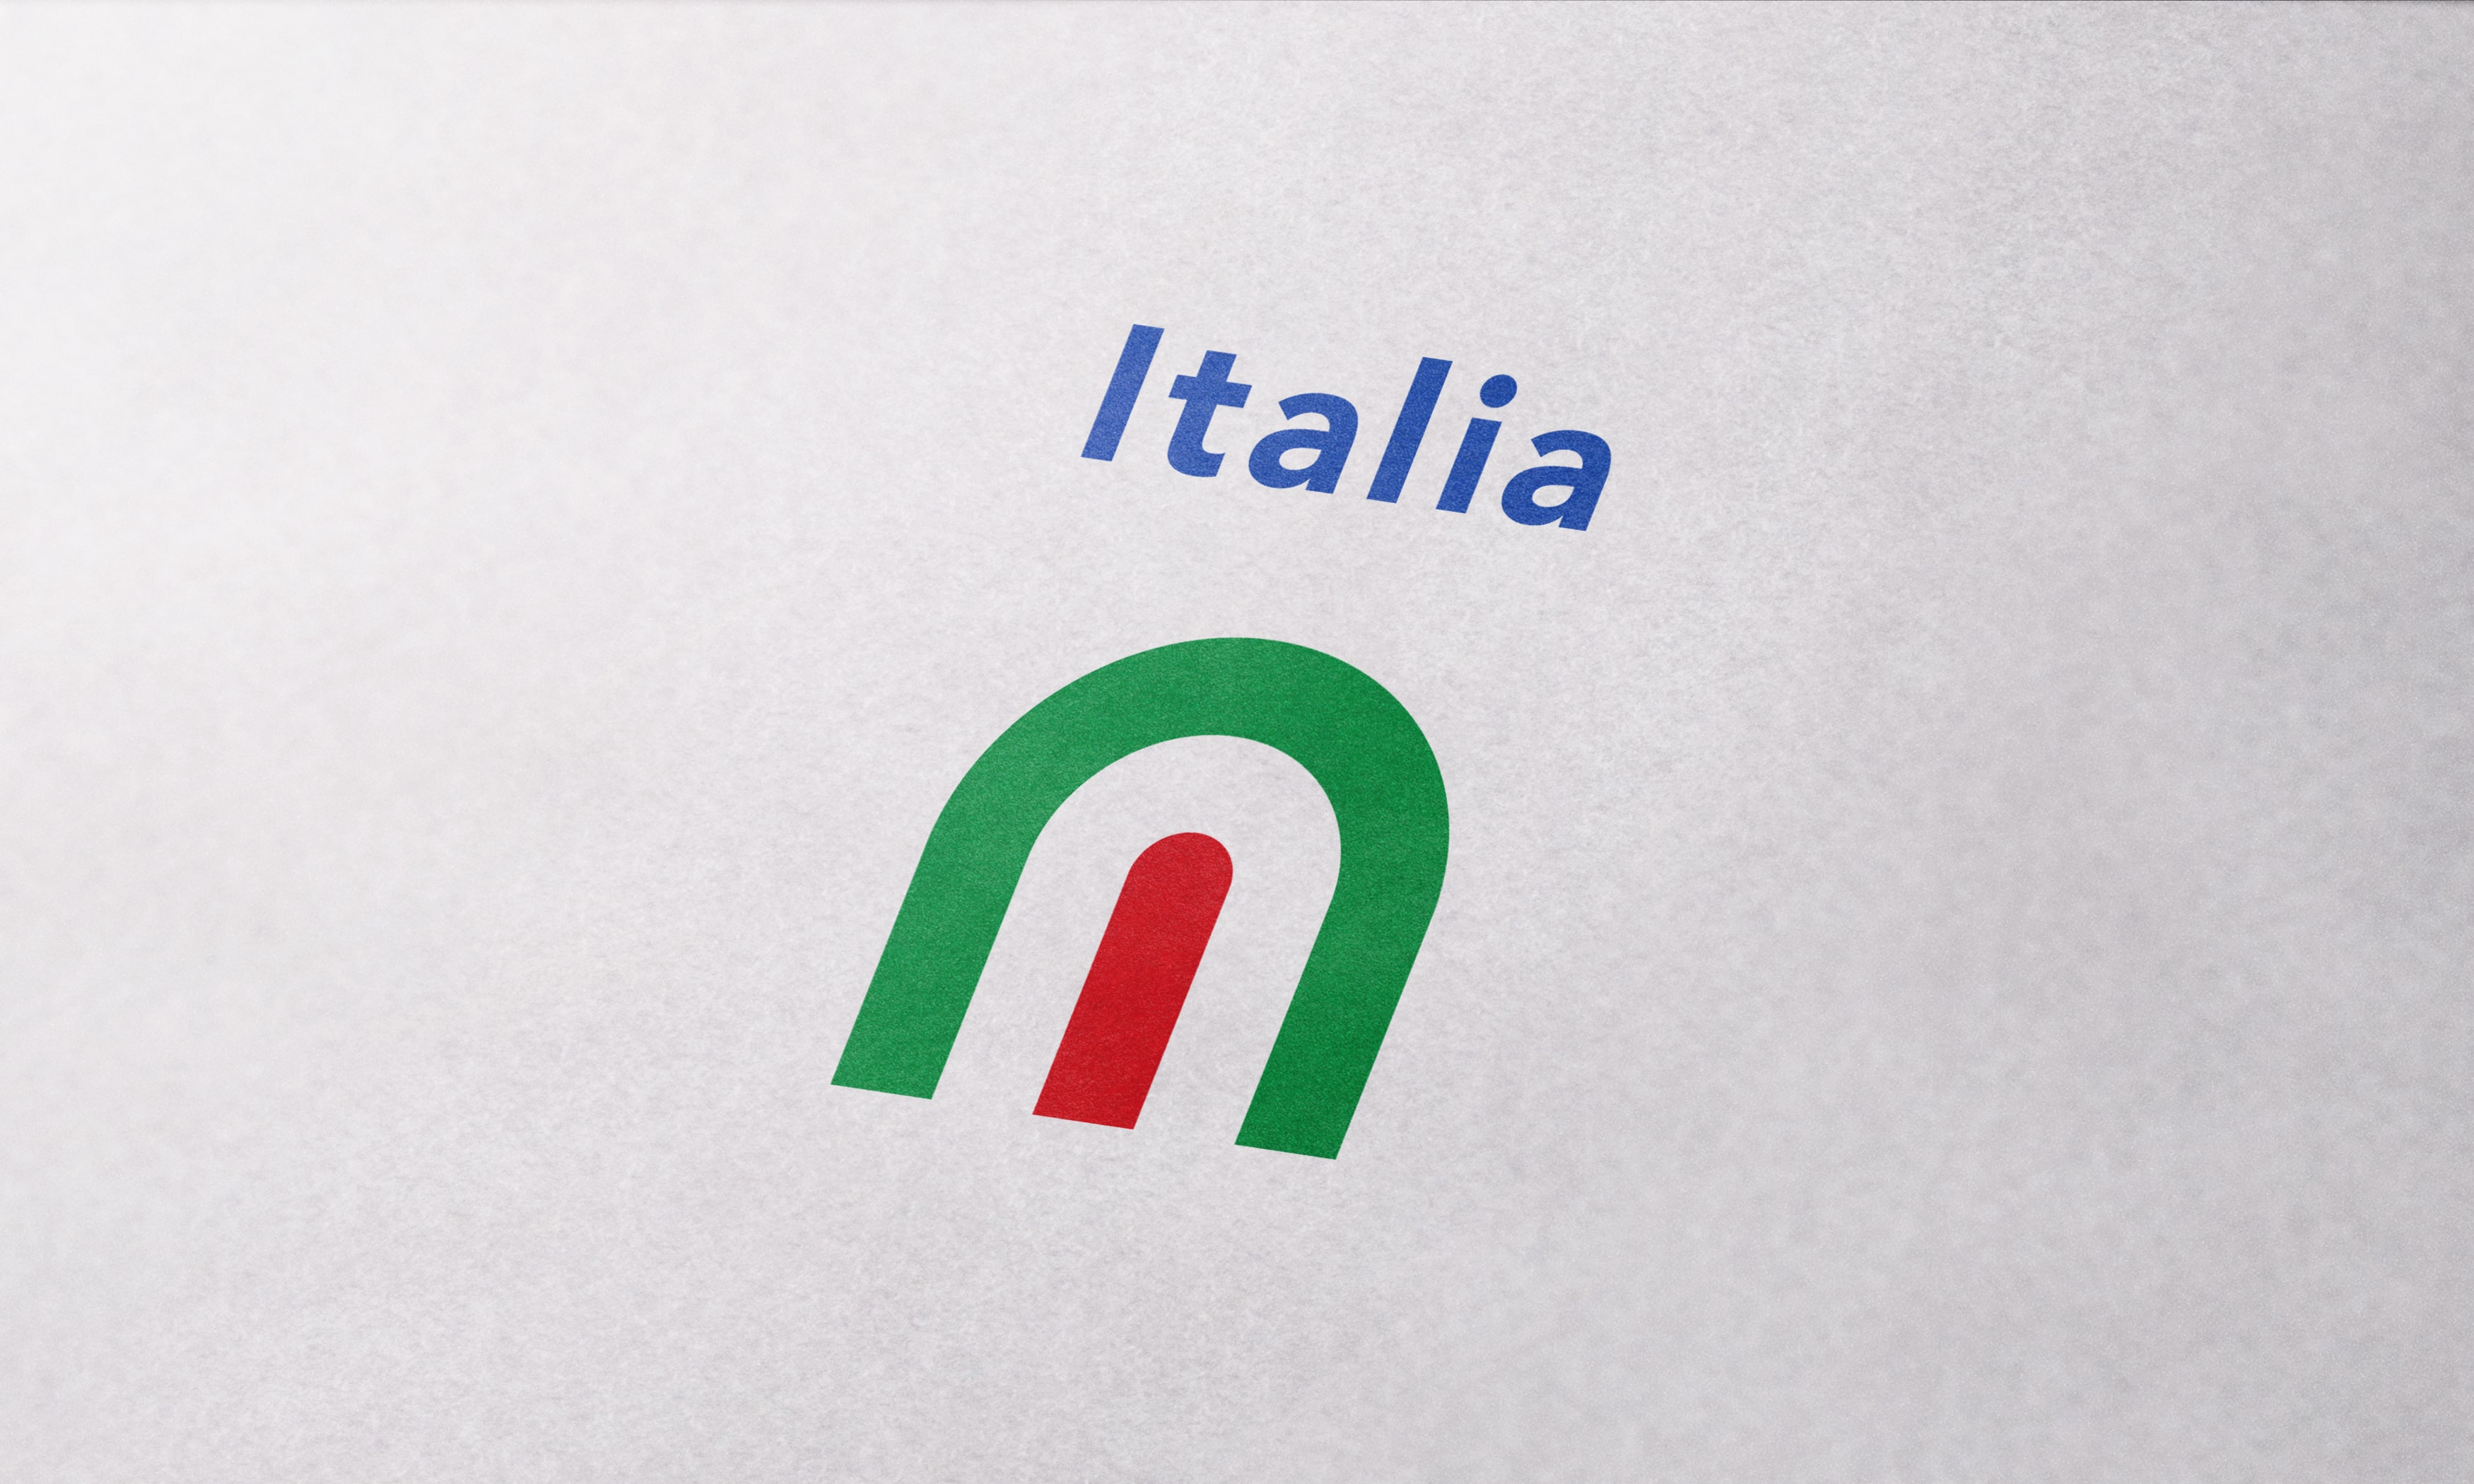 The Country Branding as a Solution for Enhancing the Italian Brand